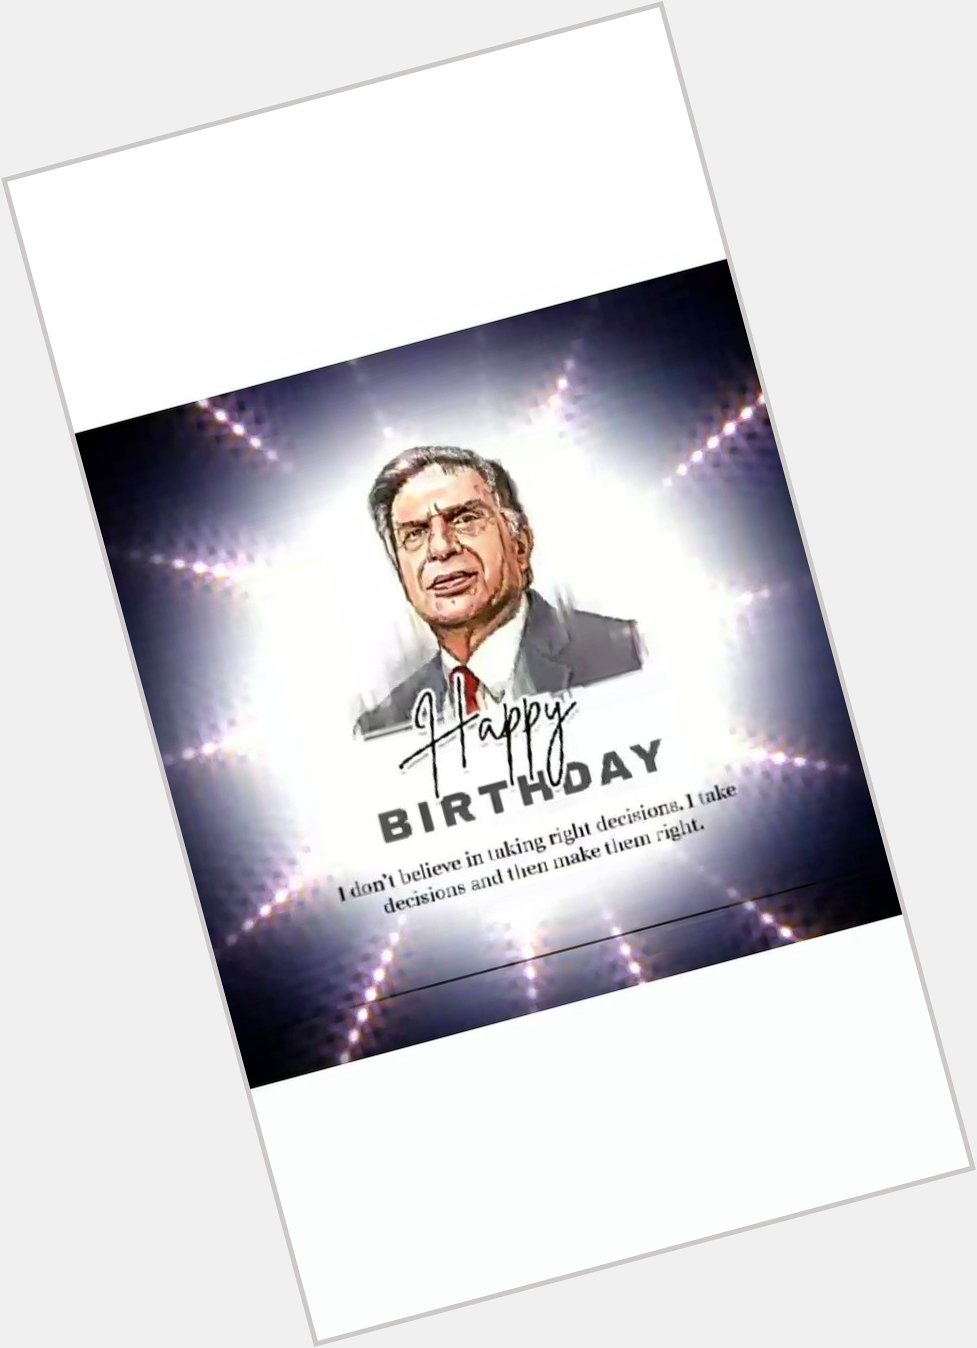  the person with golden heart 
Happy birthday Ratan Tata sir 